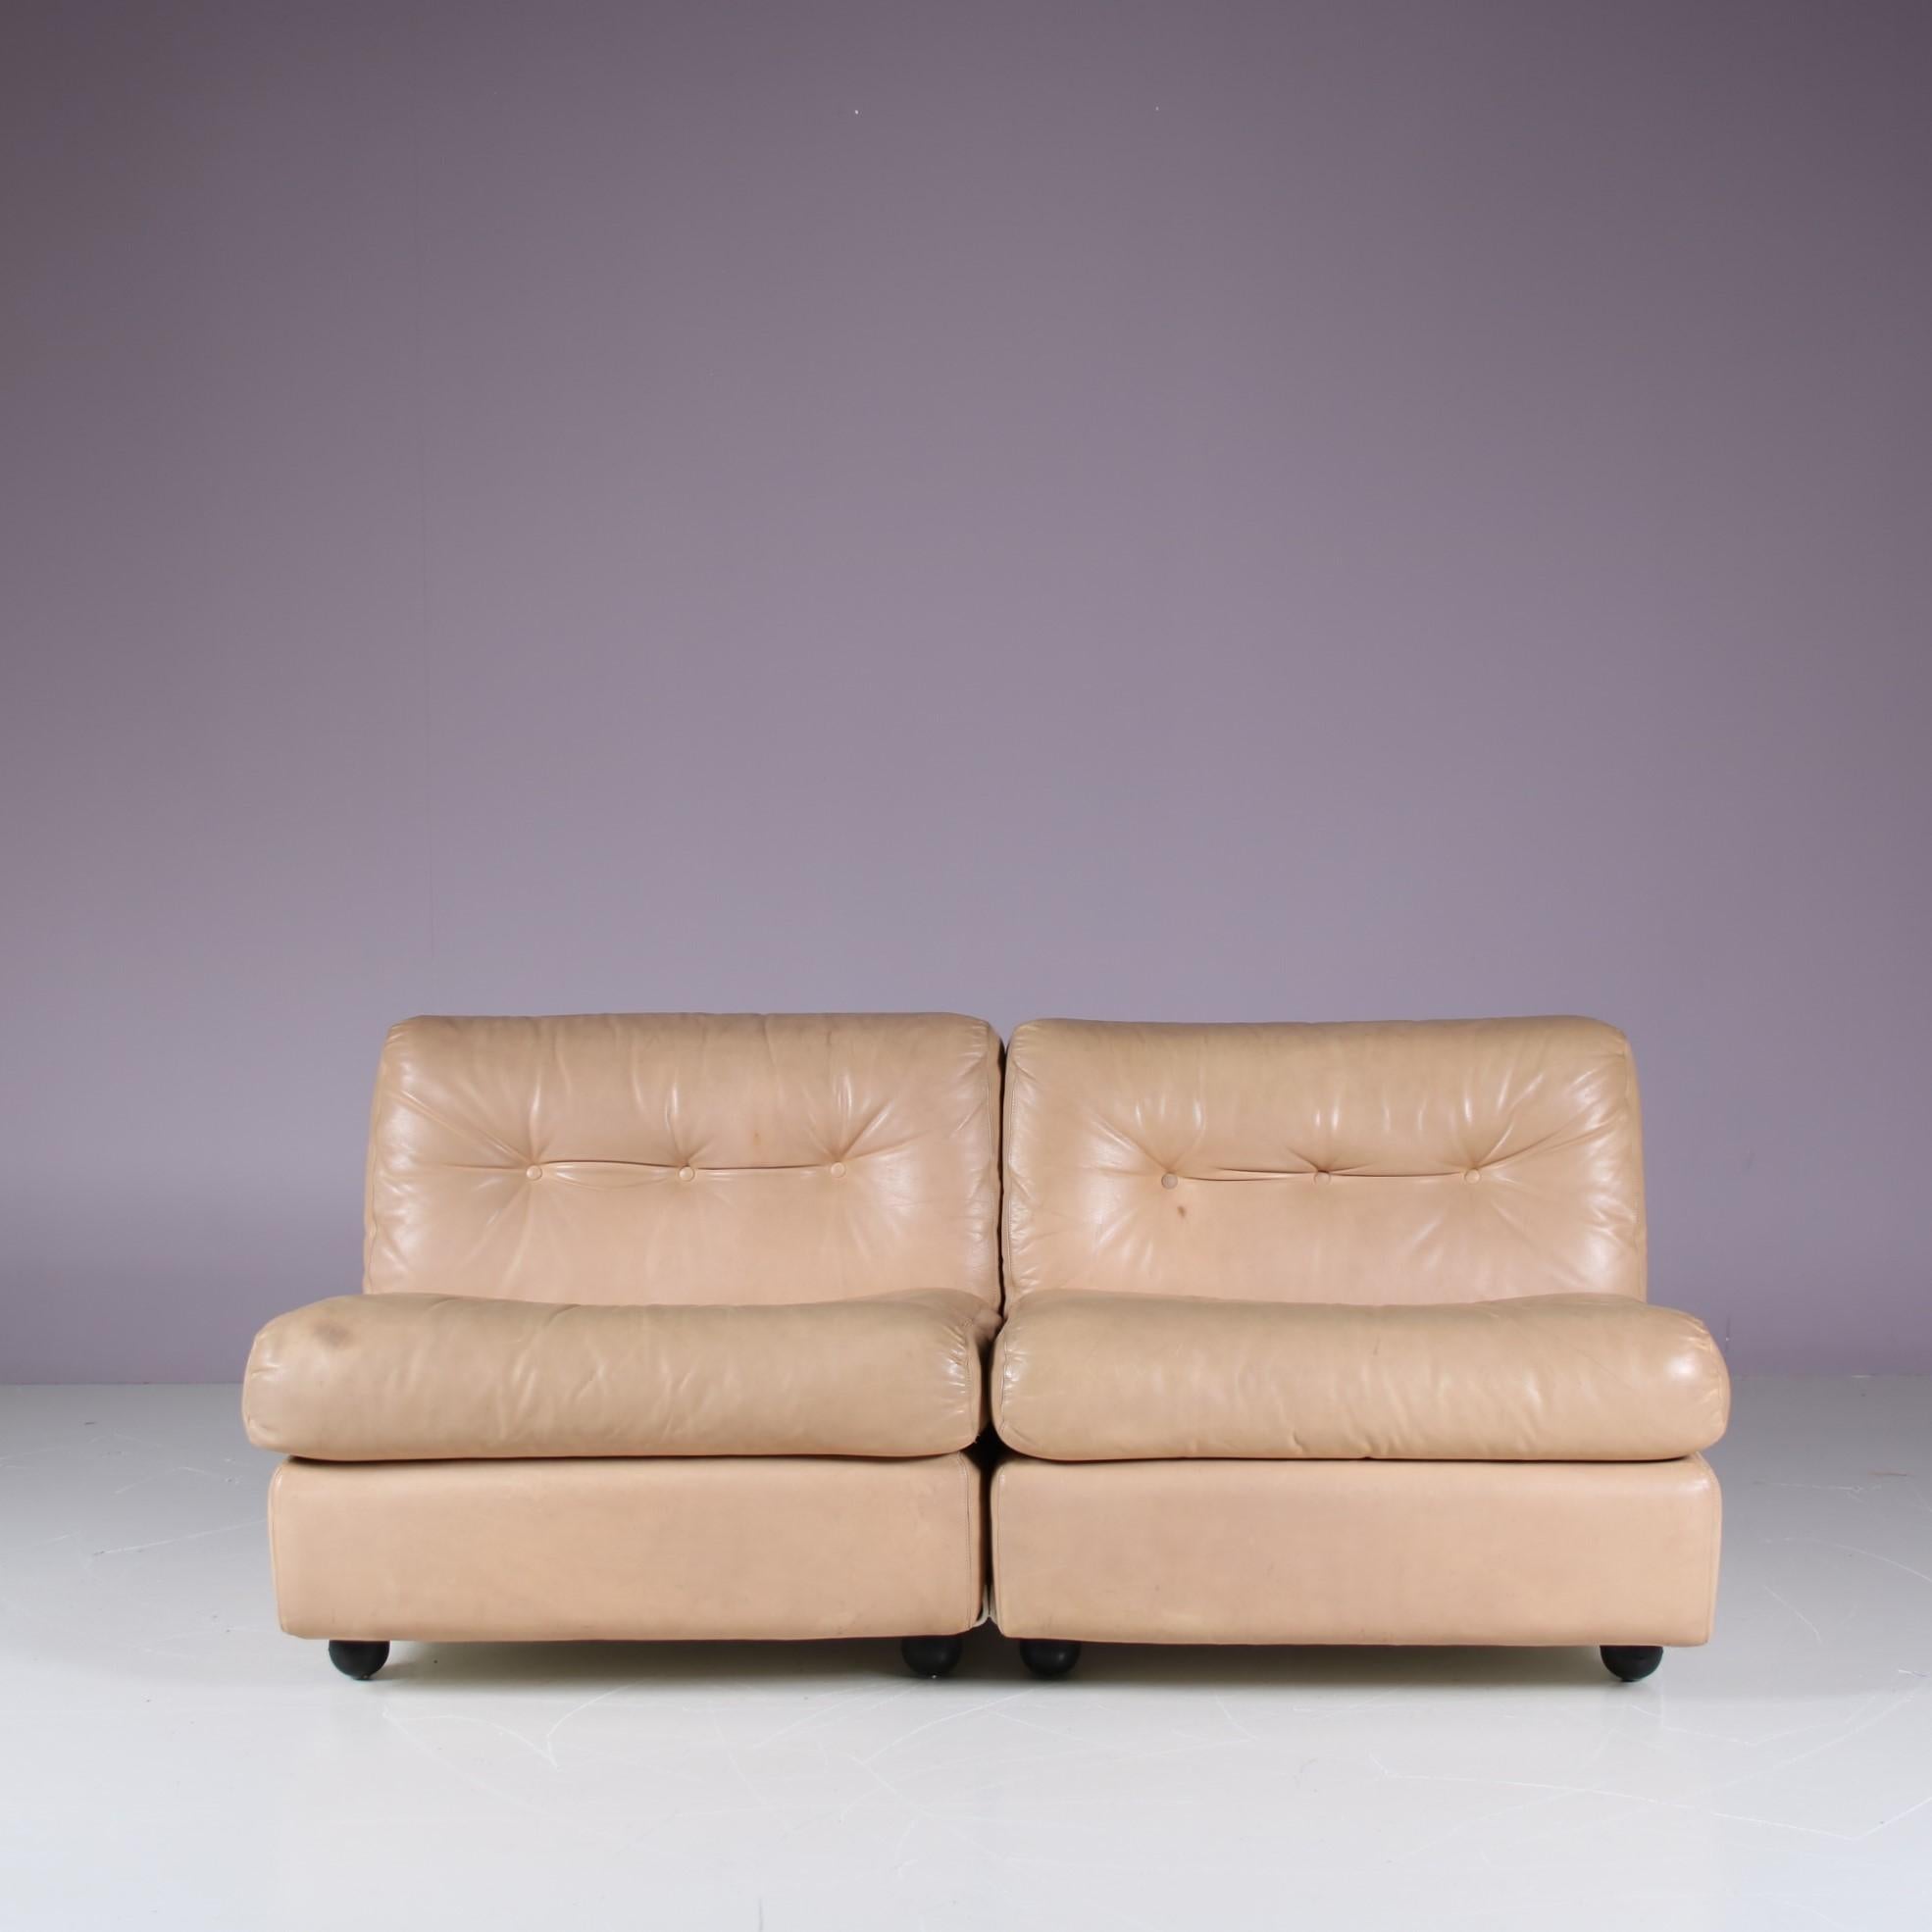 “Amanta” Sectional Sofa by Mario Bellini for C&B Italia, 1960 For Sale 4